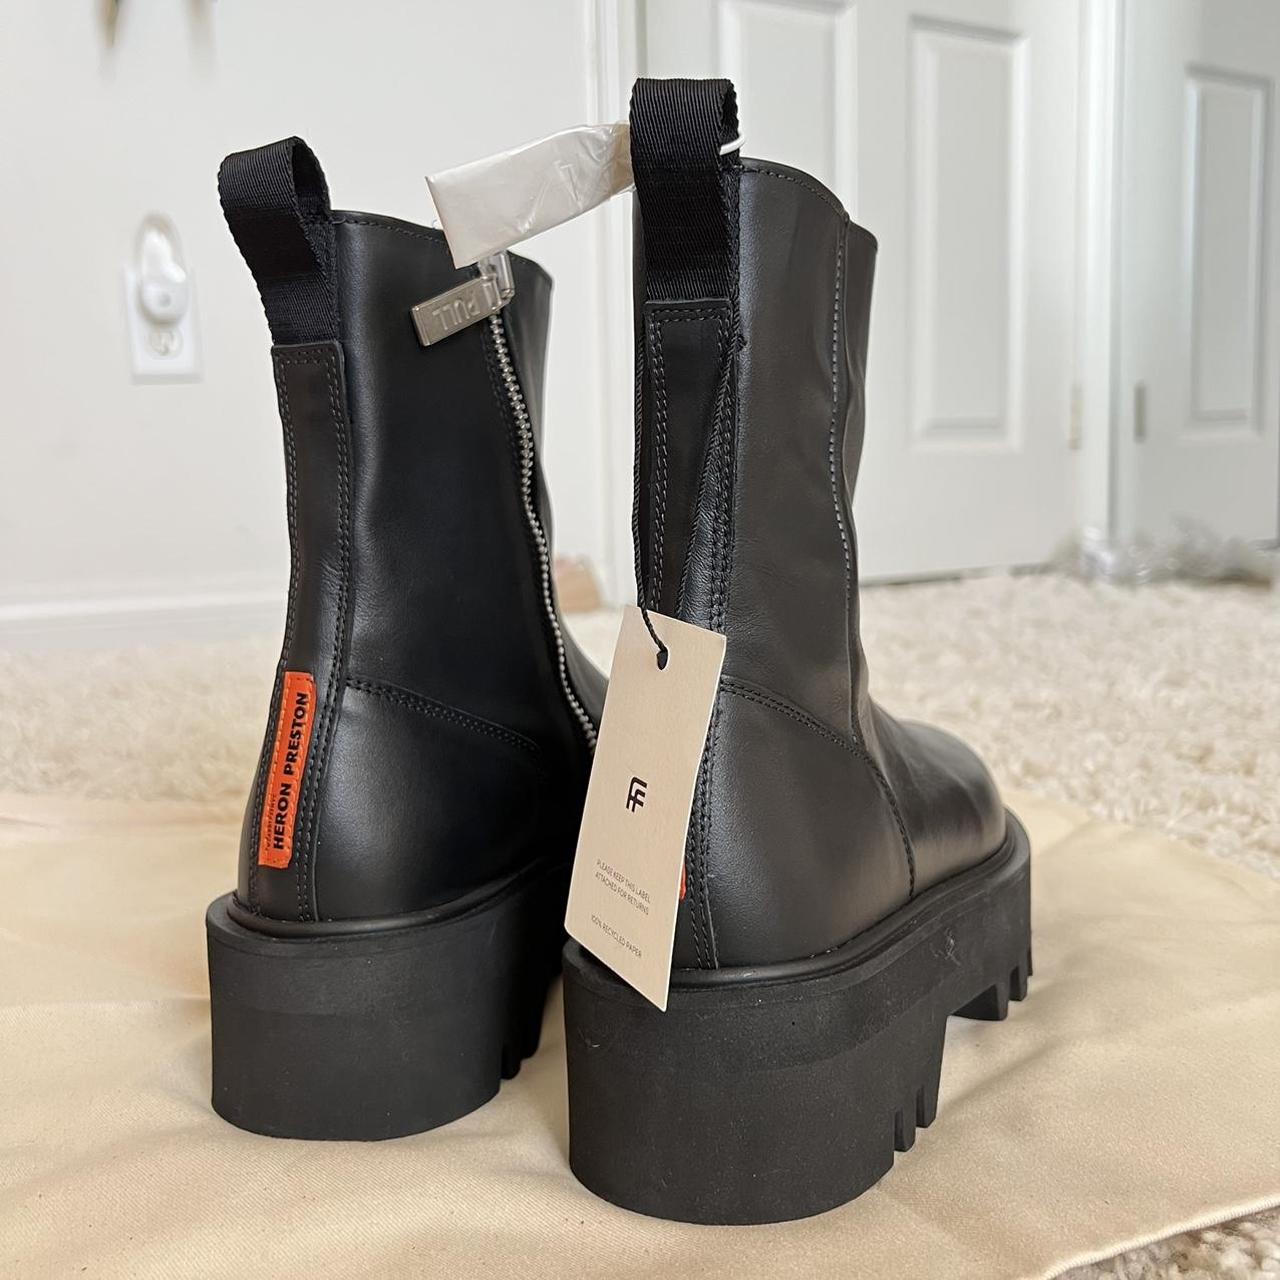 Product Image 3 - Heron Preston ankle boots
100% leather
Tried